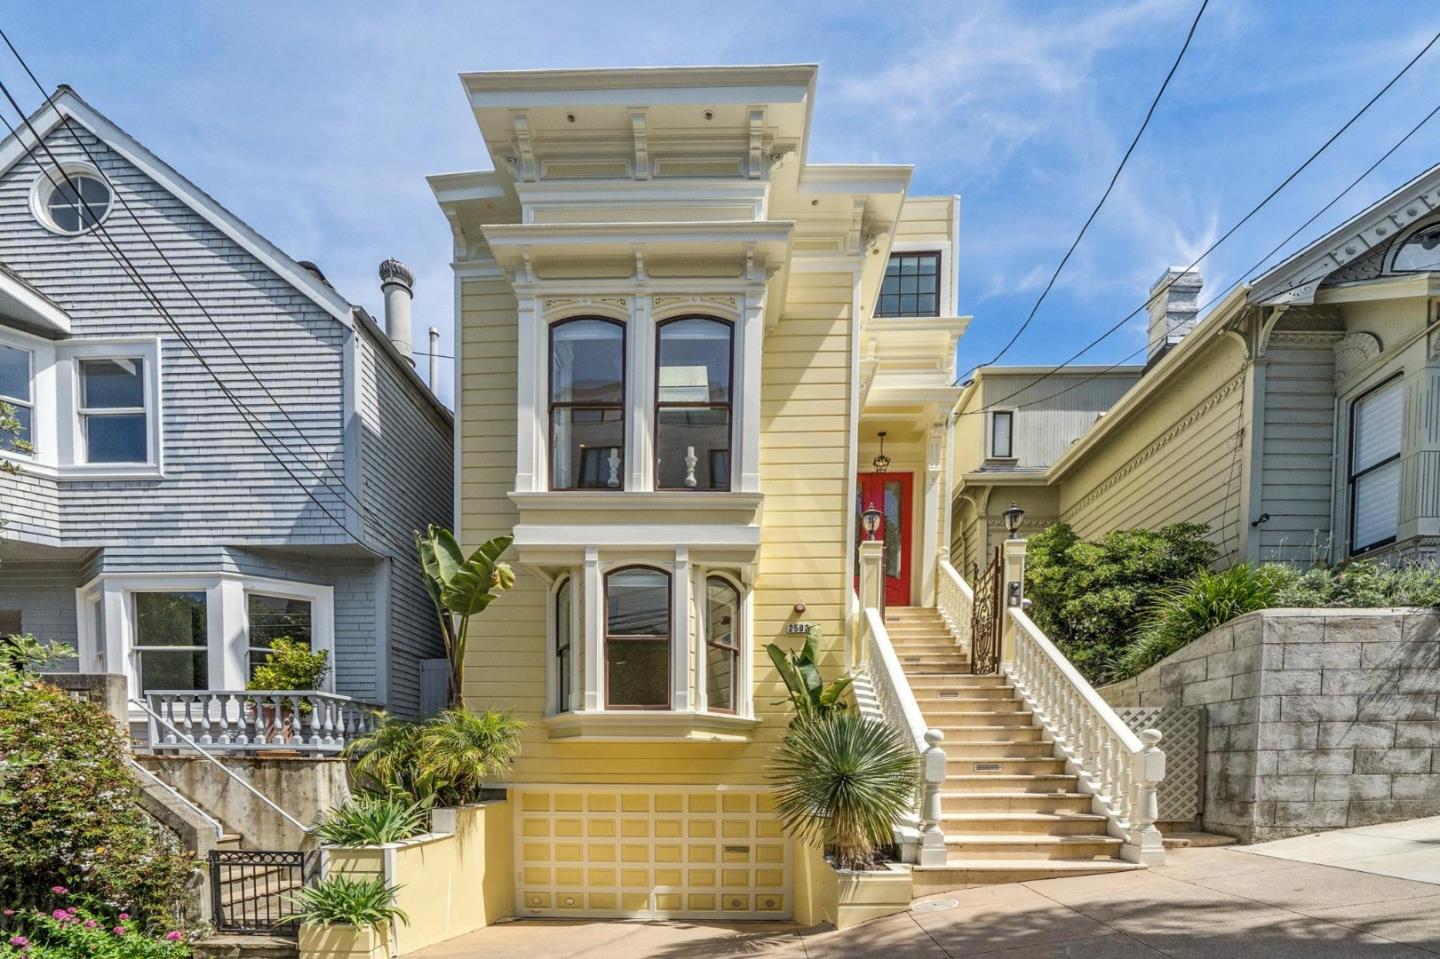 Contact your realtor today to schedule a private showing! Victorian residence with panoramic views of the SF Bay, Alcatraz, City Skyline, & Coit Tower. This 1900 Victorian was meticulously redesigned & rebuilt in 2006 including new foundation, heated balconies, A/C, fire sprinklers, surround sound speakers & quiet elevator that runs from garage to top flr primary suite. Immerse yourself in SF history & luxury in this exquisite Russian Hill residence. Spread over 4 elegant stories, the home offers unparalleled comfort & space with high ceilings & hrdwd flrs. French kitchen boasting high-end appliances & spacious walk-in pantry. Convenient for intimate gatherings in the formal dining rm. Unwind in the private sanctuary of the primary suite which occupies its own flr, featuring a luxurious livng rm, private balcony with breathtaking vistas of the bay, spacious bdrm, bthrm, & additional balcony to soak in the city panorama. 4 additional bdrms including 2nd primary suite, & ideal Au-pair quarters on ground flr with separate entrance & 4 well-appointed bthrms provide ample space. Enjoy walks to the vibrant North Beach restaurants, Aquatic Park & more. Seize opportunity to live in SF history! [2 SOCIAL RMS IN HOME HAS 2 STAGING STYLE PHOTOS 1 IS VIRTUAL, 3 BDRMS ARE VERTUAL STAGING]